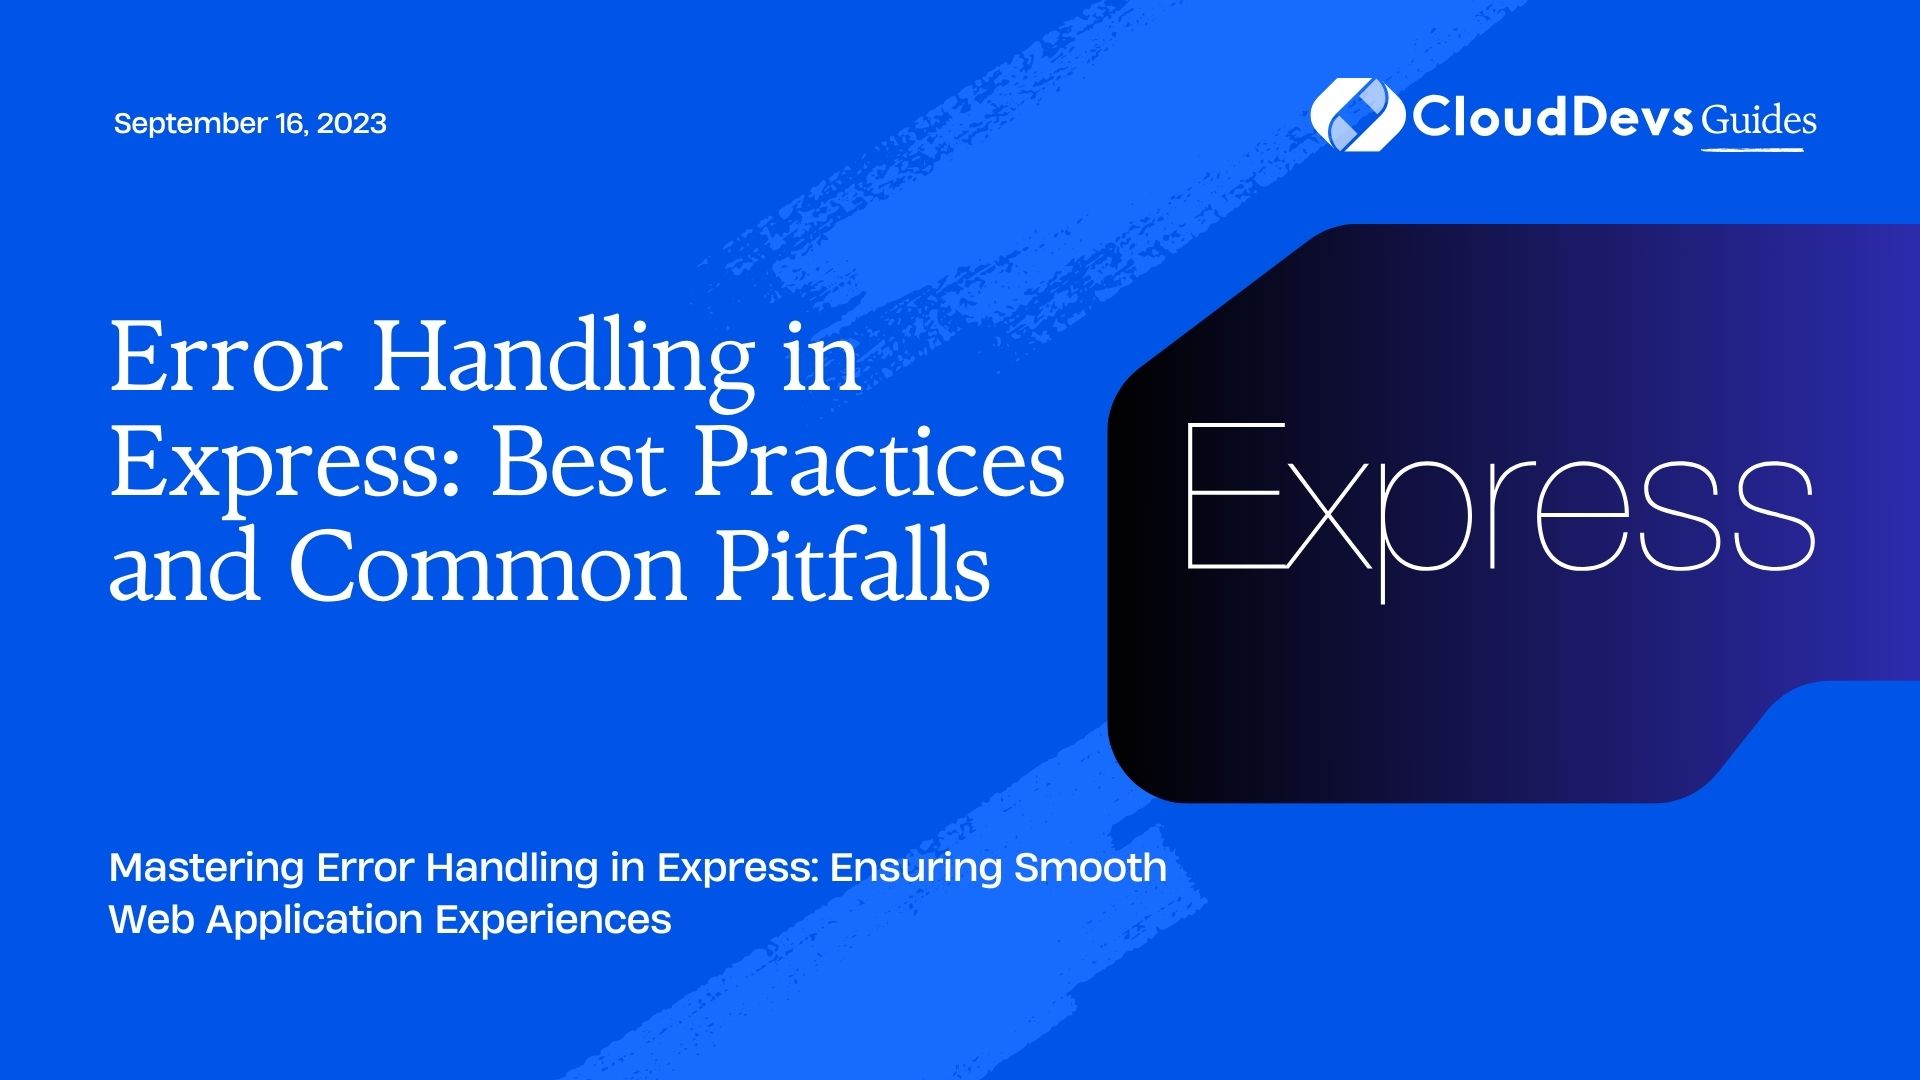 Error Handling in Express: Best Practices and Common Pitfalls